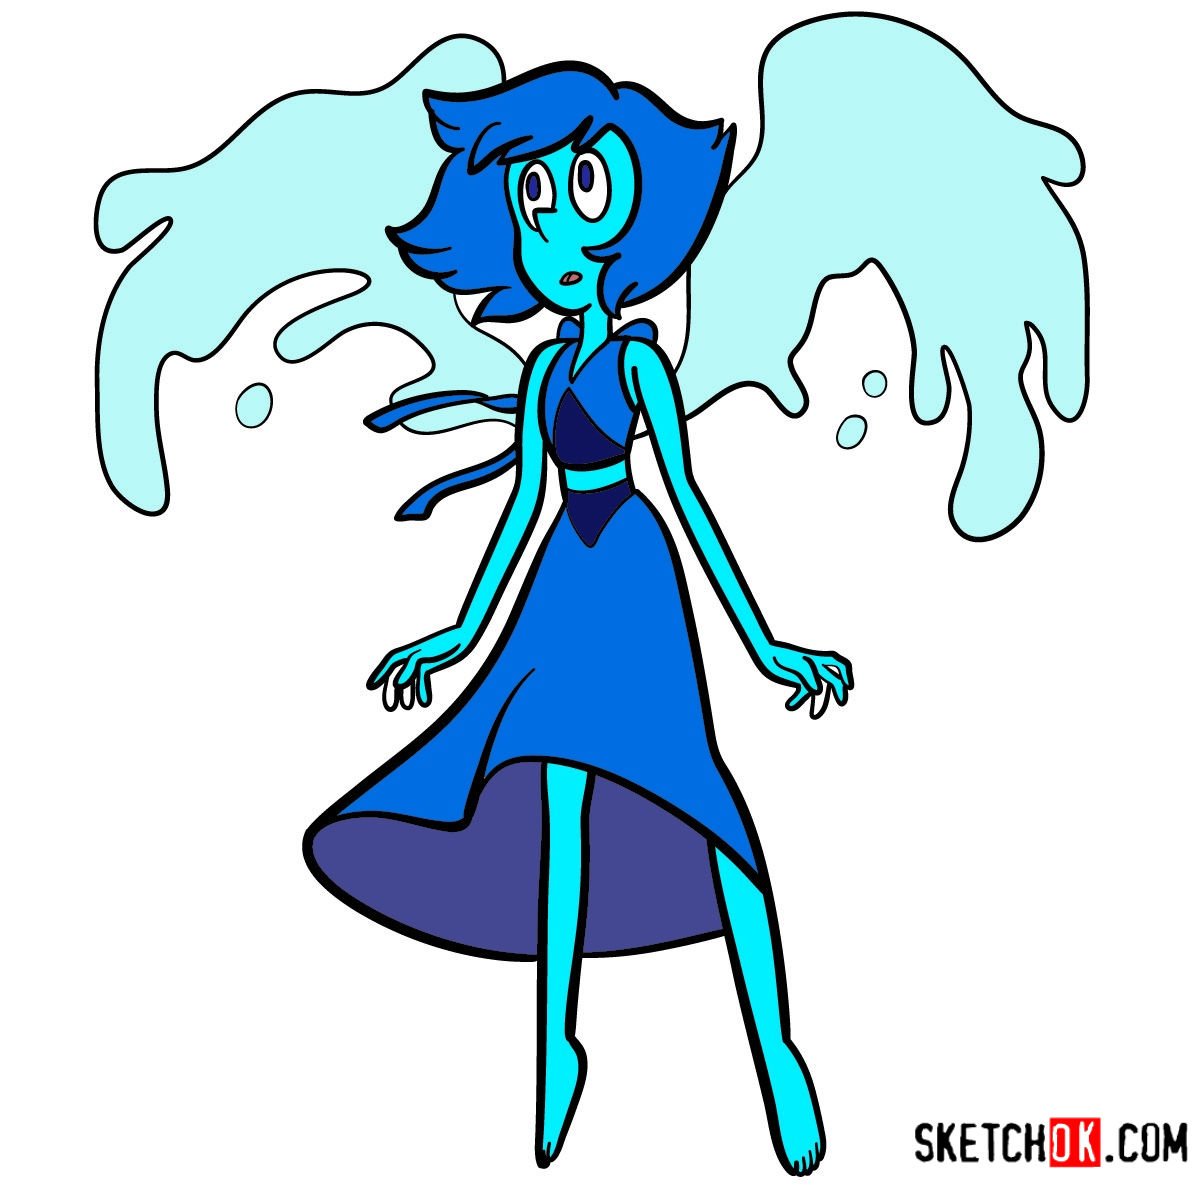 How to draw Lapis Lazuli Steven Universe Sketchok easy drawing guides